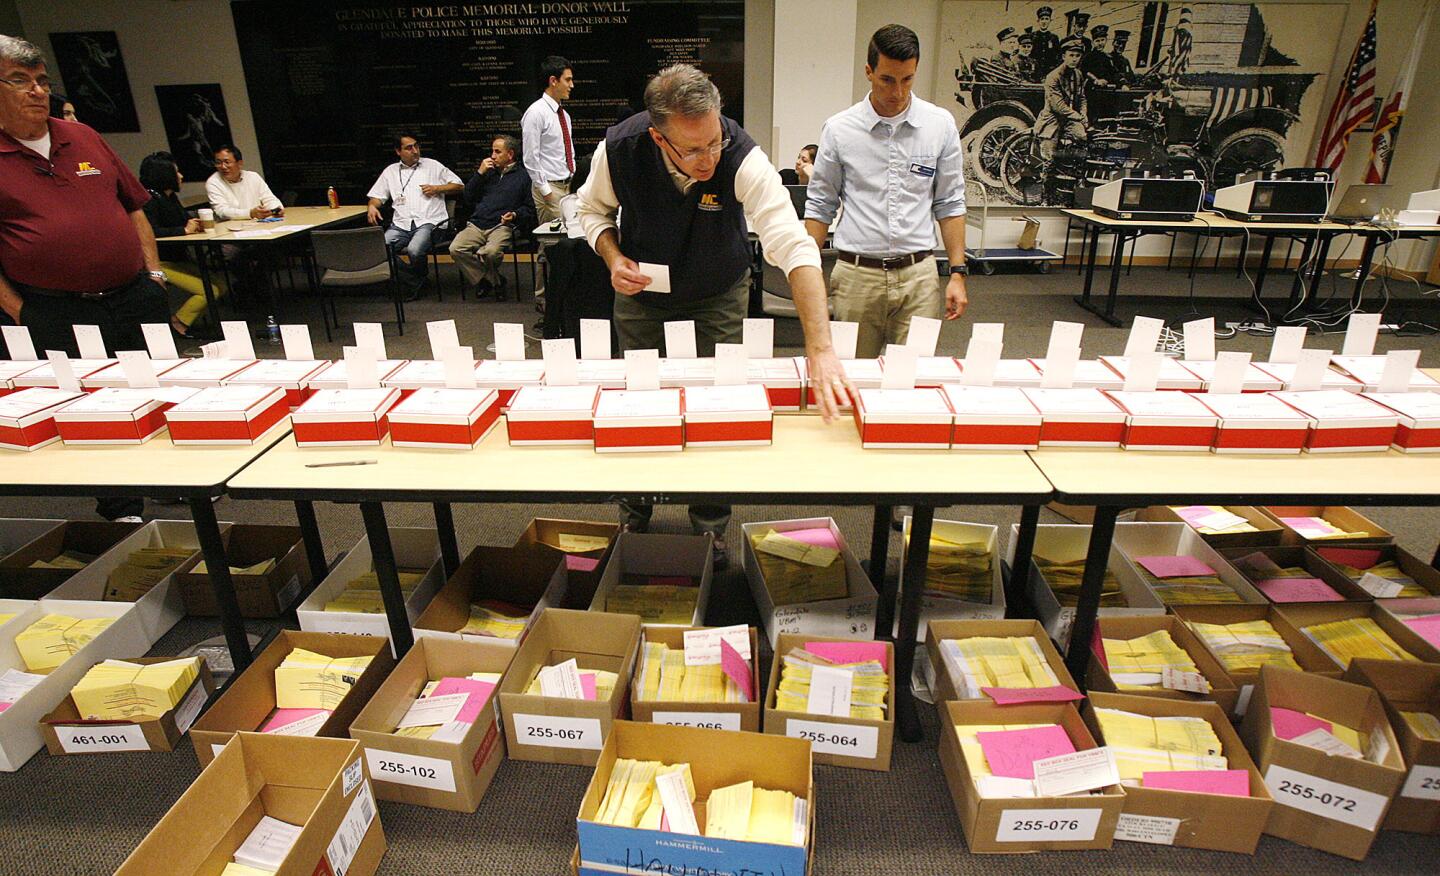 Dan Pabich, with Martin & Chapman Co., puts leader cards in the red ballot boxes with absentee ballots in the Community Room at the Glendale Police Department on election day in Glendale on Tuesday, April 2, 2013.